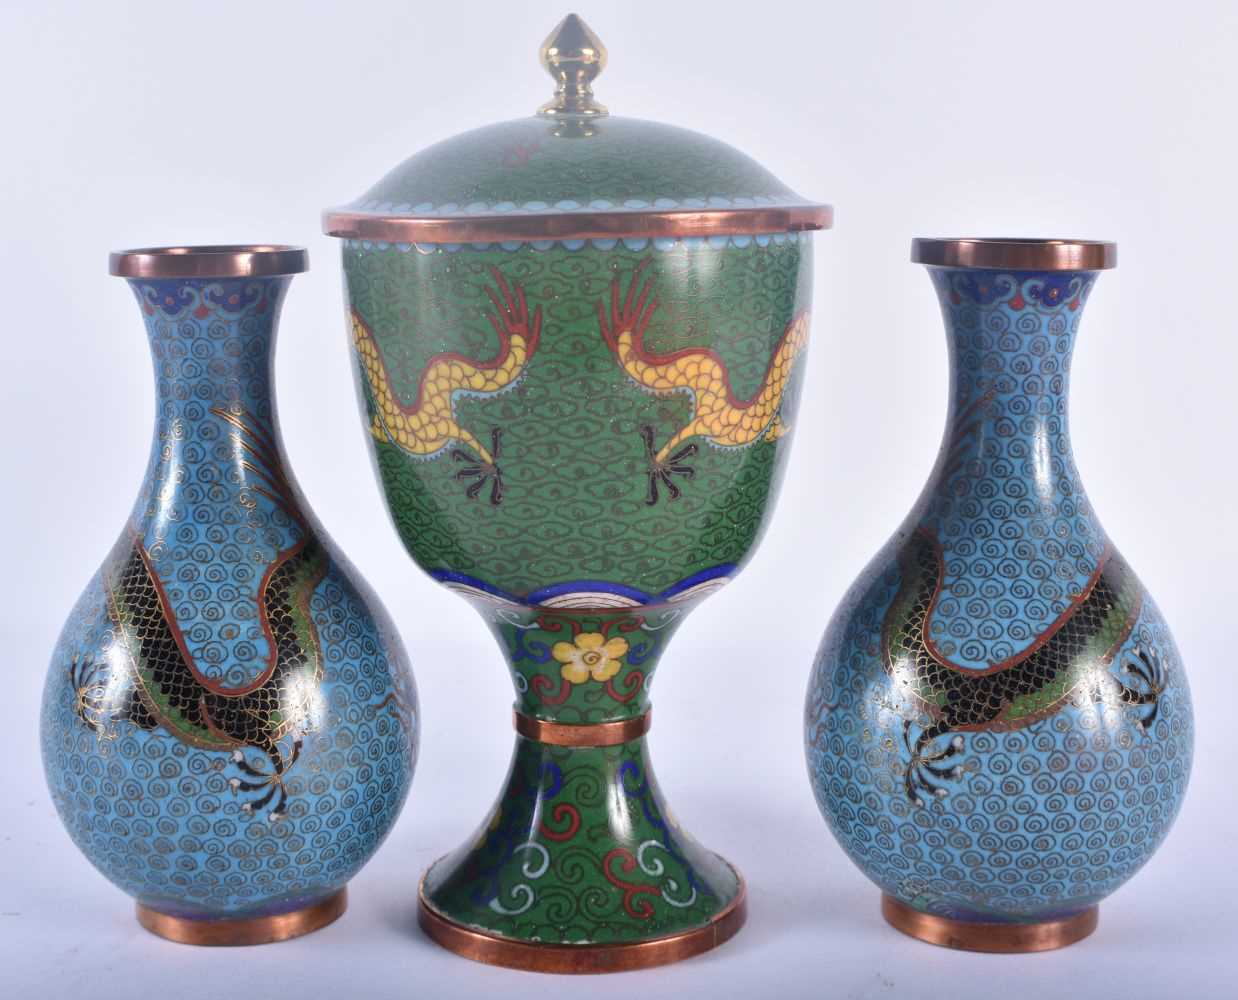 A PAIR OF 19TH CENTURY CHINESE CLOISONNE ENAMEL DRAGON VASES together with a later vase and cover. - Image 2 of 4